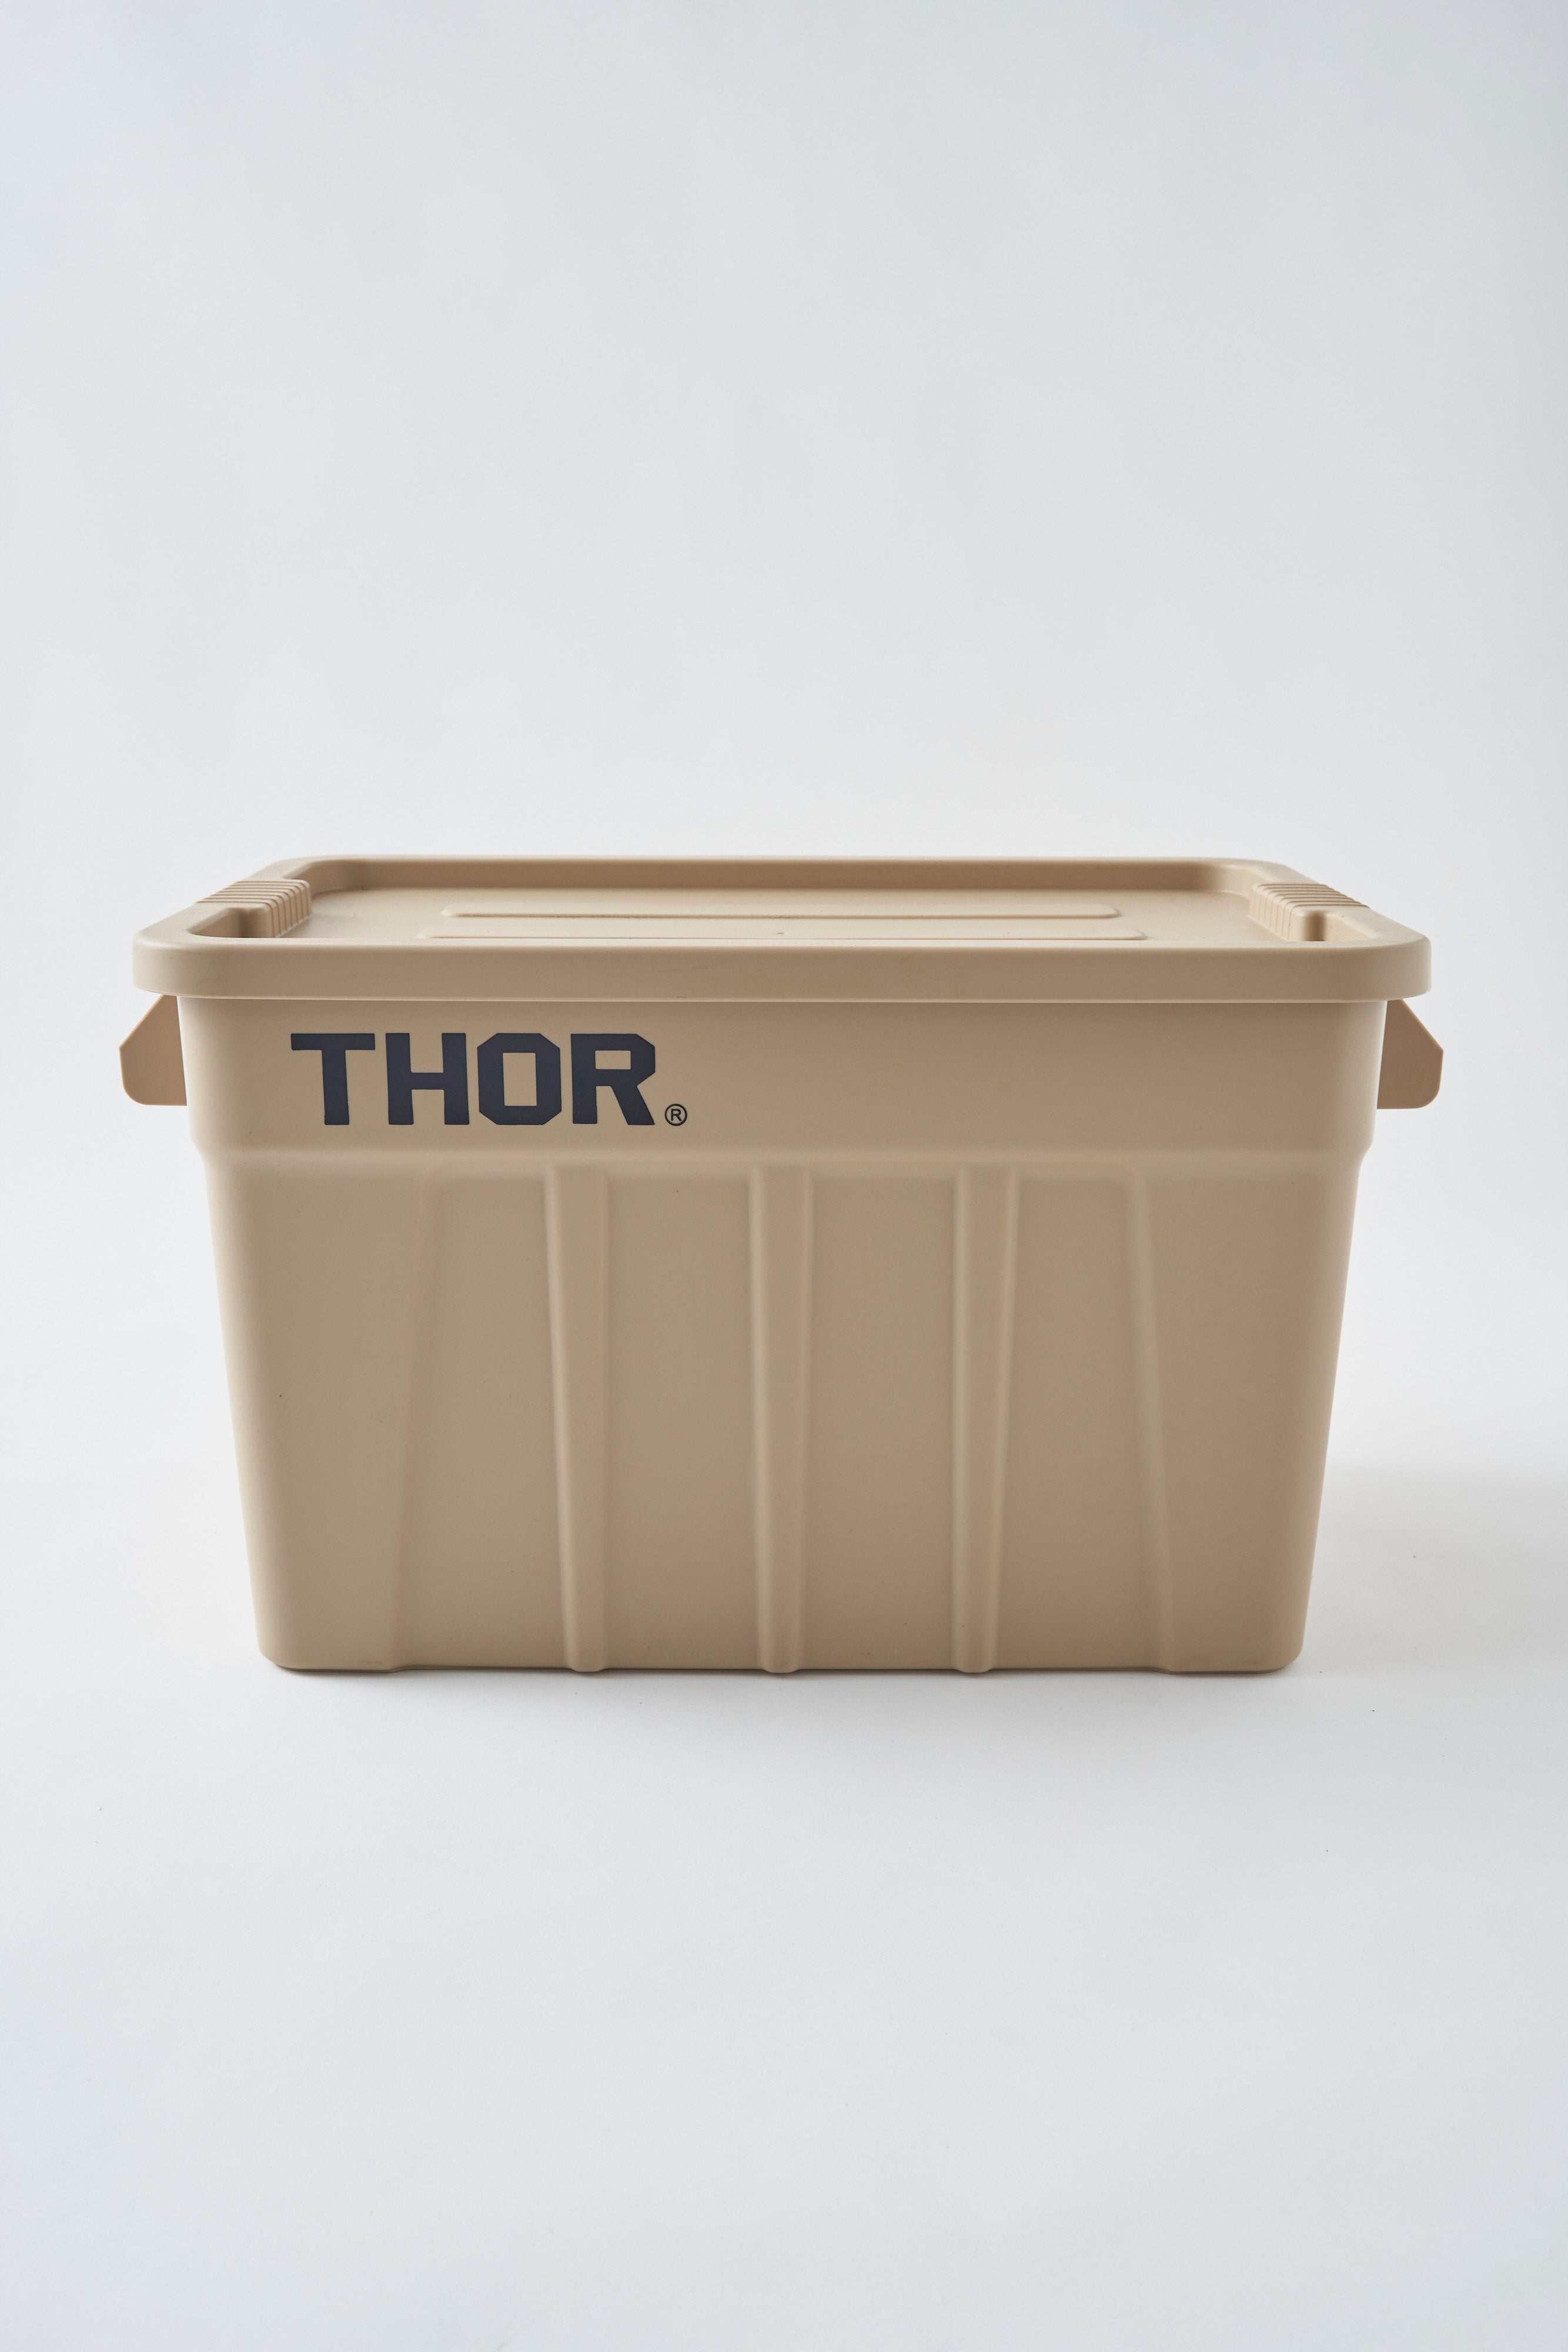 Thor /  Large Totes With Lid 75L